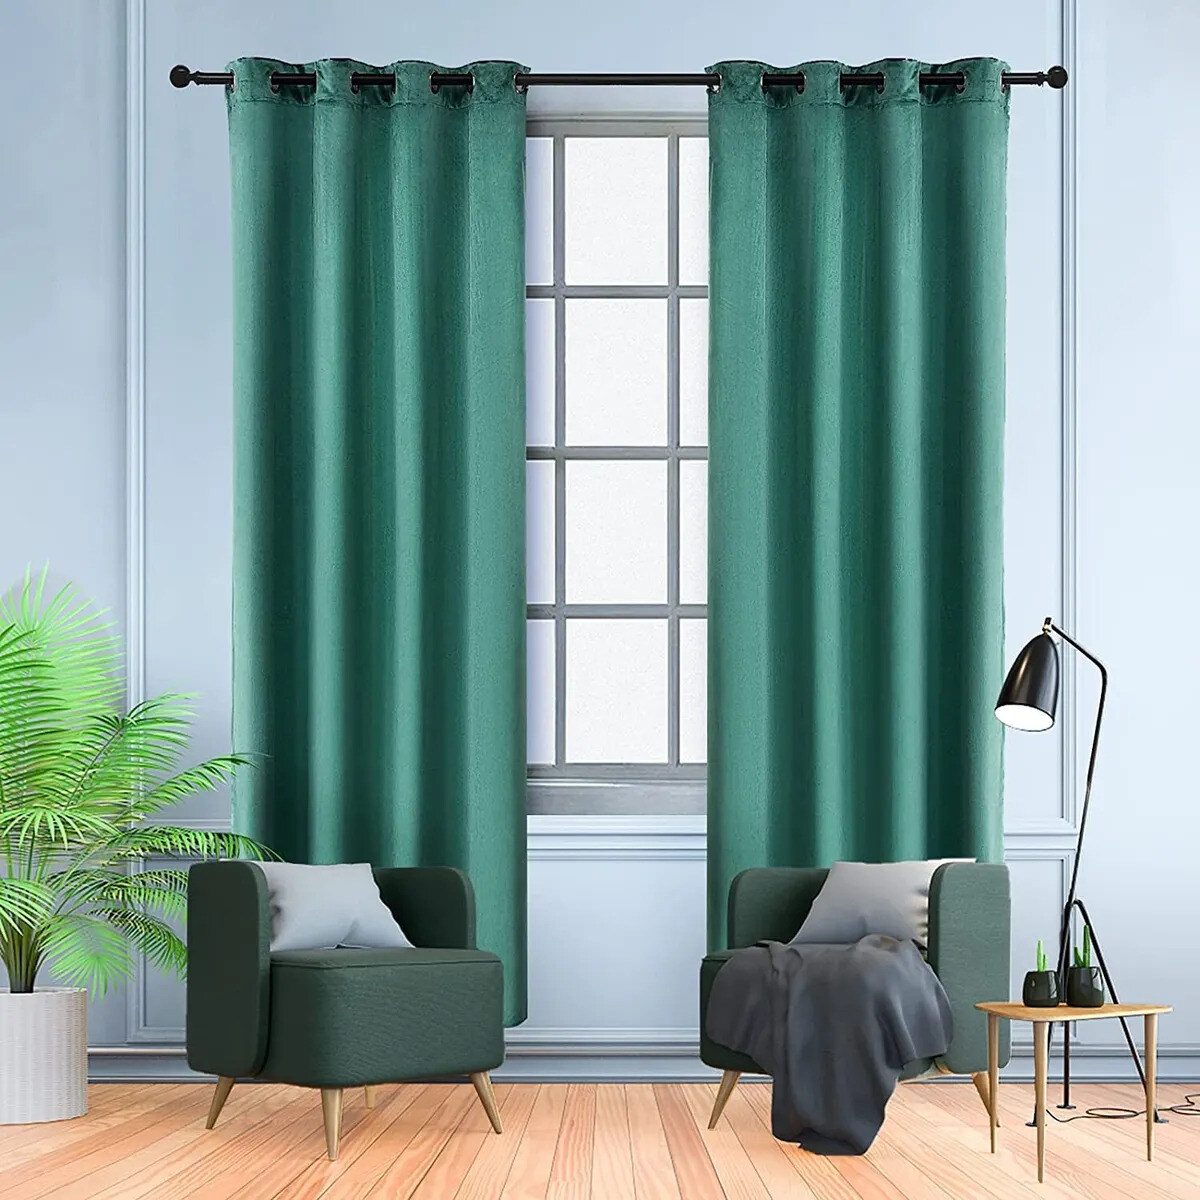 Buy WONTEX 100% Grey Blackout Curtains for Bedroom - Thermal Insulated,  Noise Reducing and Sun Blocking Lined Window Curtain Panels for Living  Room, 52 x 72 inch, Set of 2 Grommet Winter